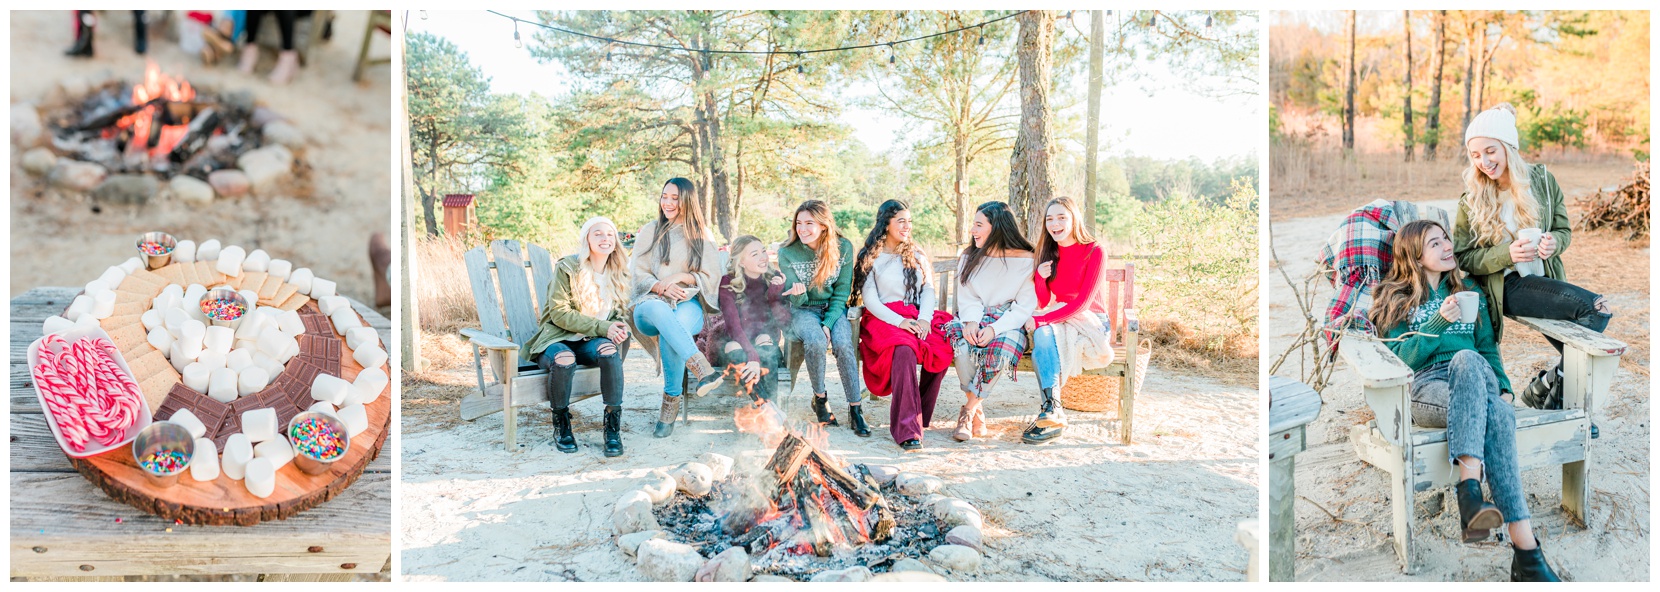 teen girls sitting by a bonfire roasting marshmallows and making s'mores